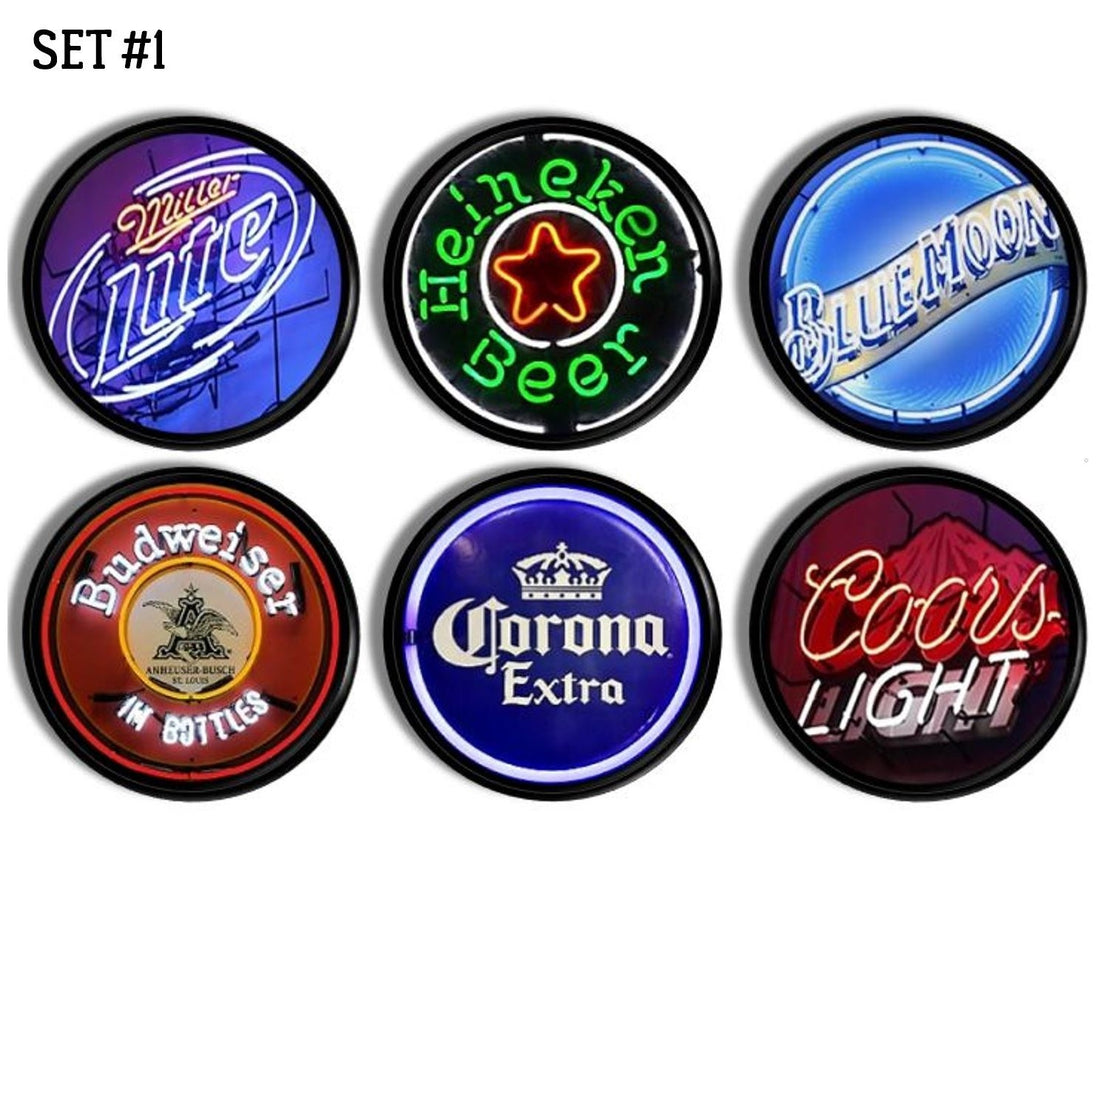 6 bar cabinet knobs in a neon beer sign theme featuring Miller Lite, Heineken, Blue Moon, Corona and Coors Brew.